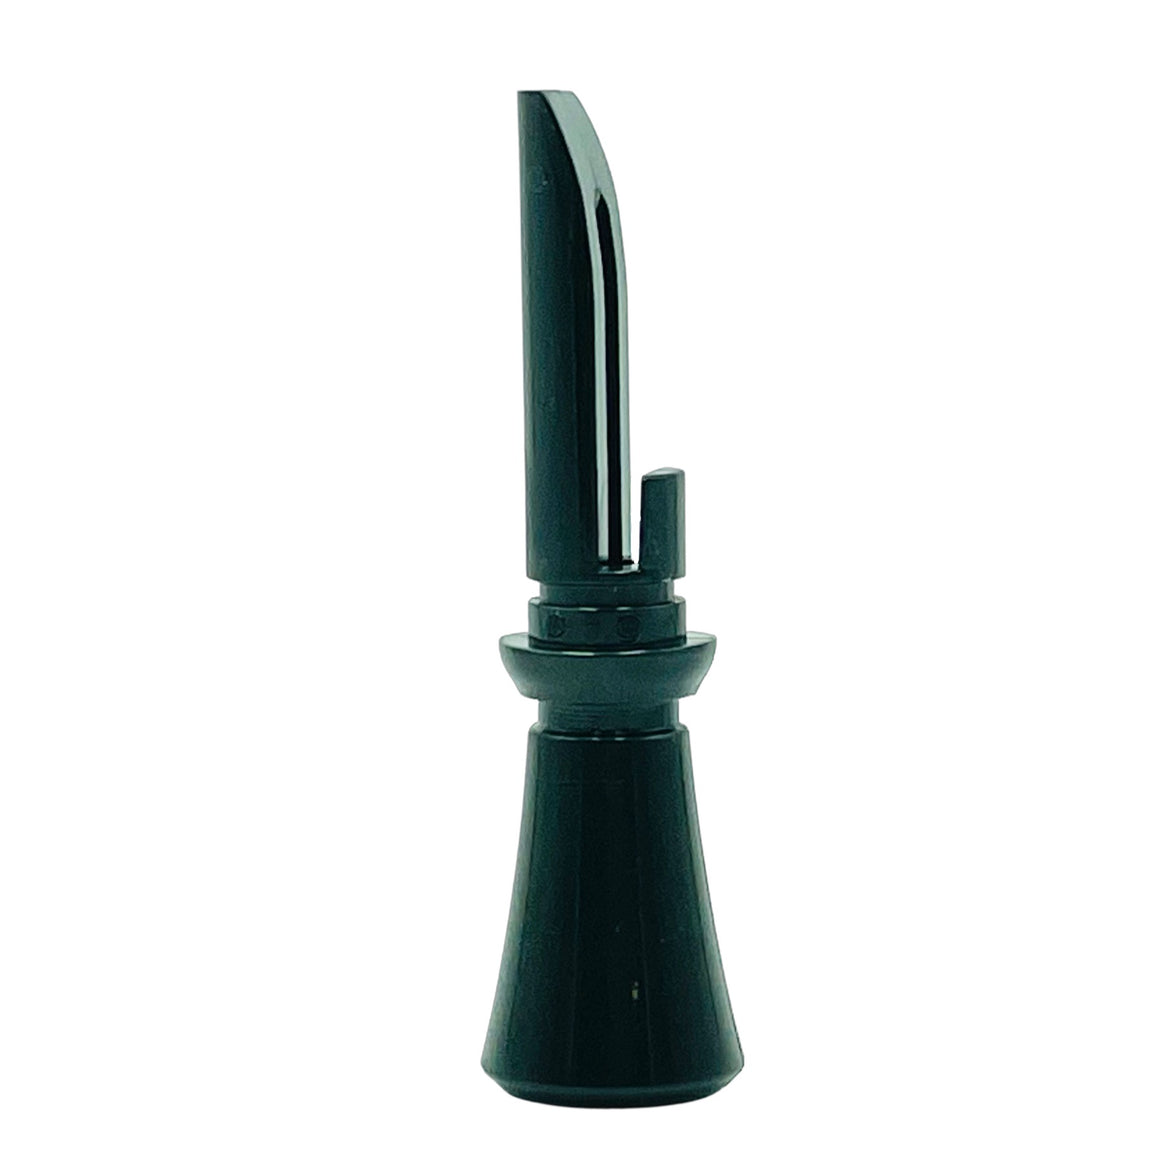 SOLID BLACK POLYCARBONATE DUCK CALL INSERT